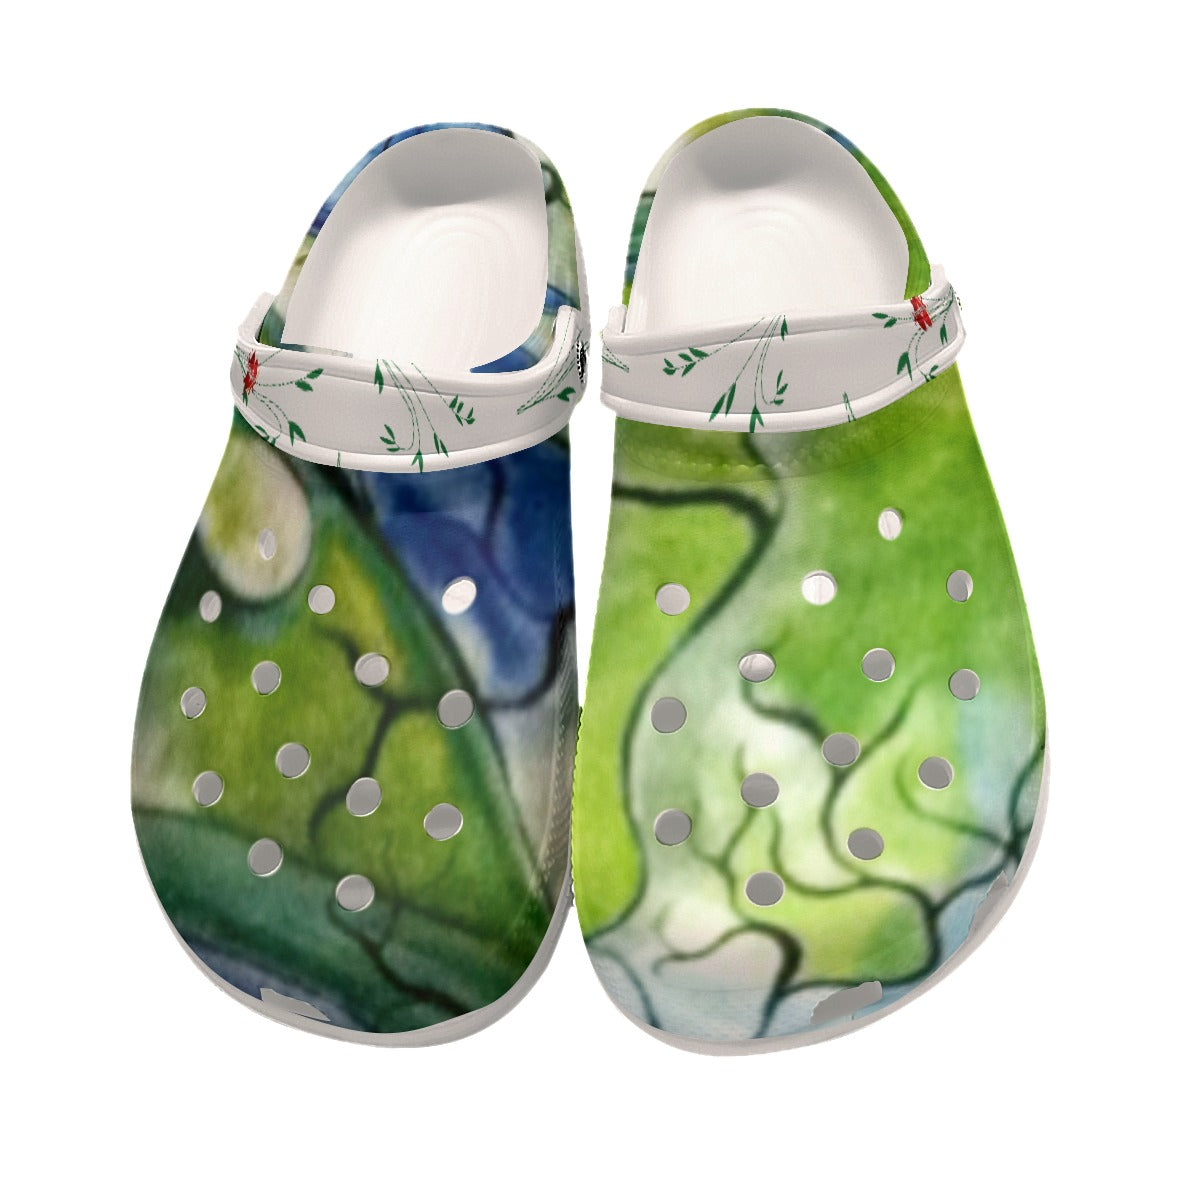 All-Over Print Classic Clogs - Transformation